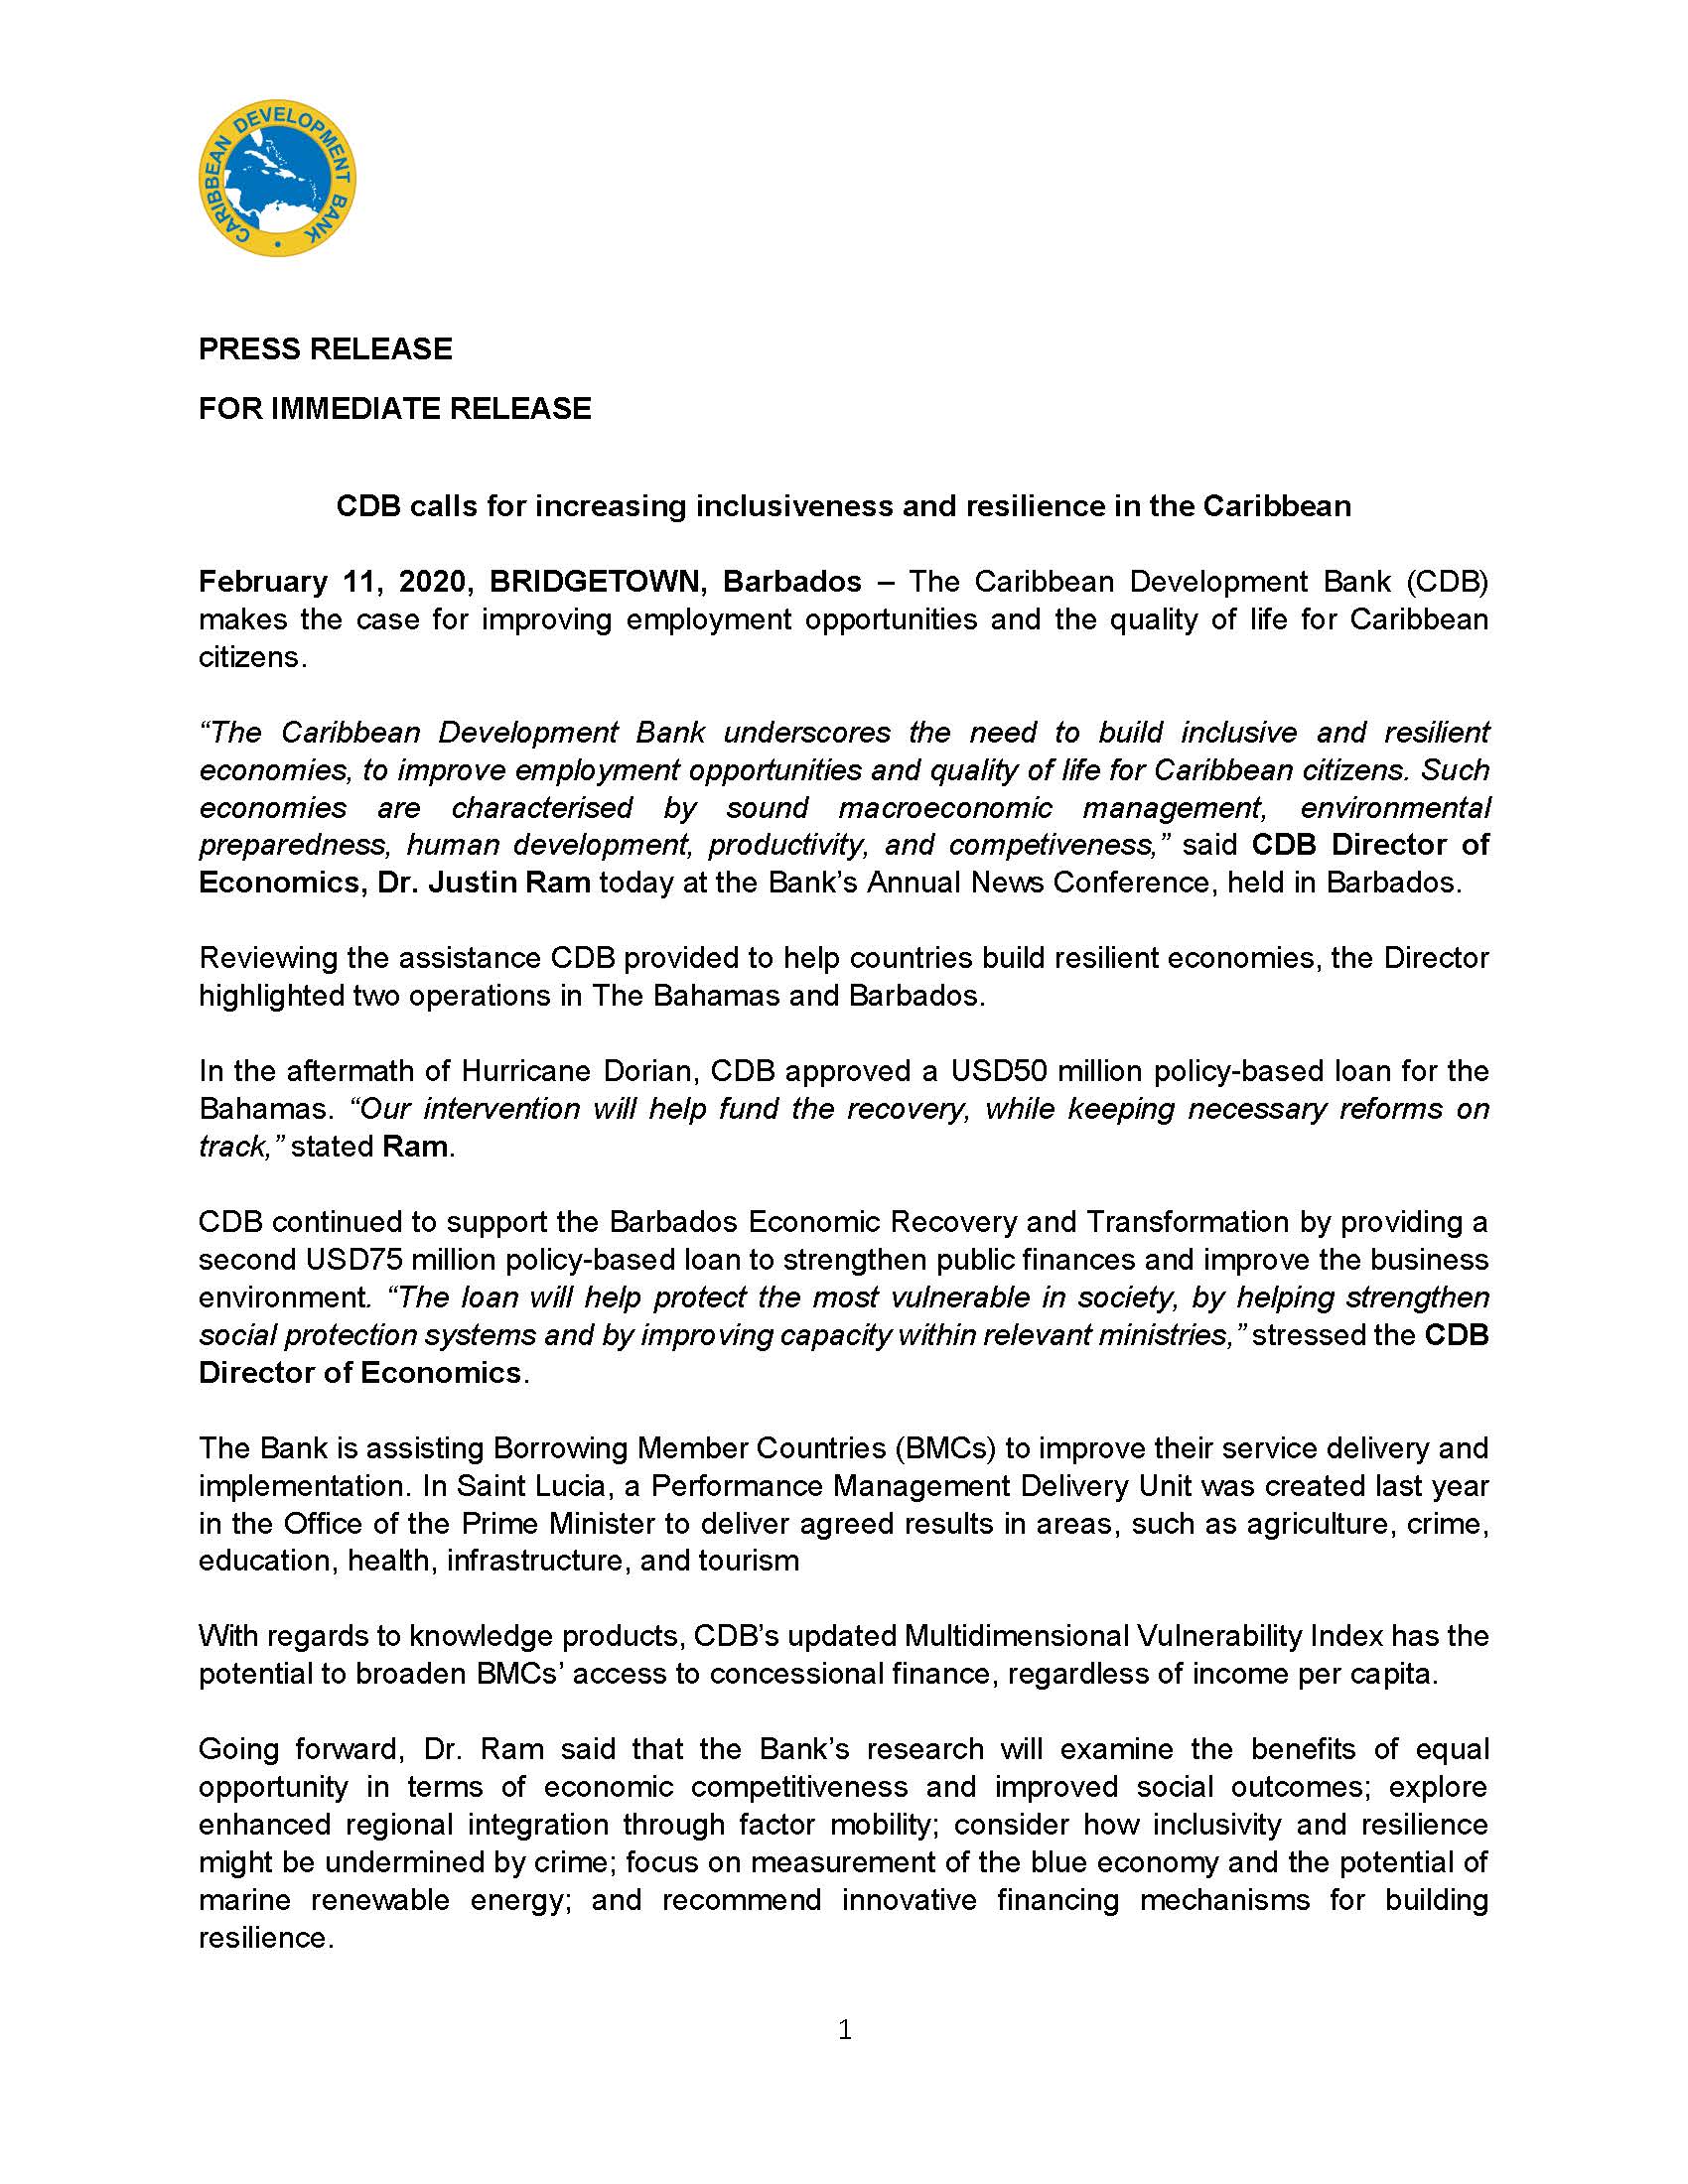 text-only first page of press release